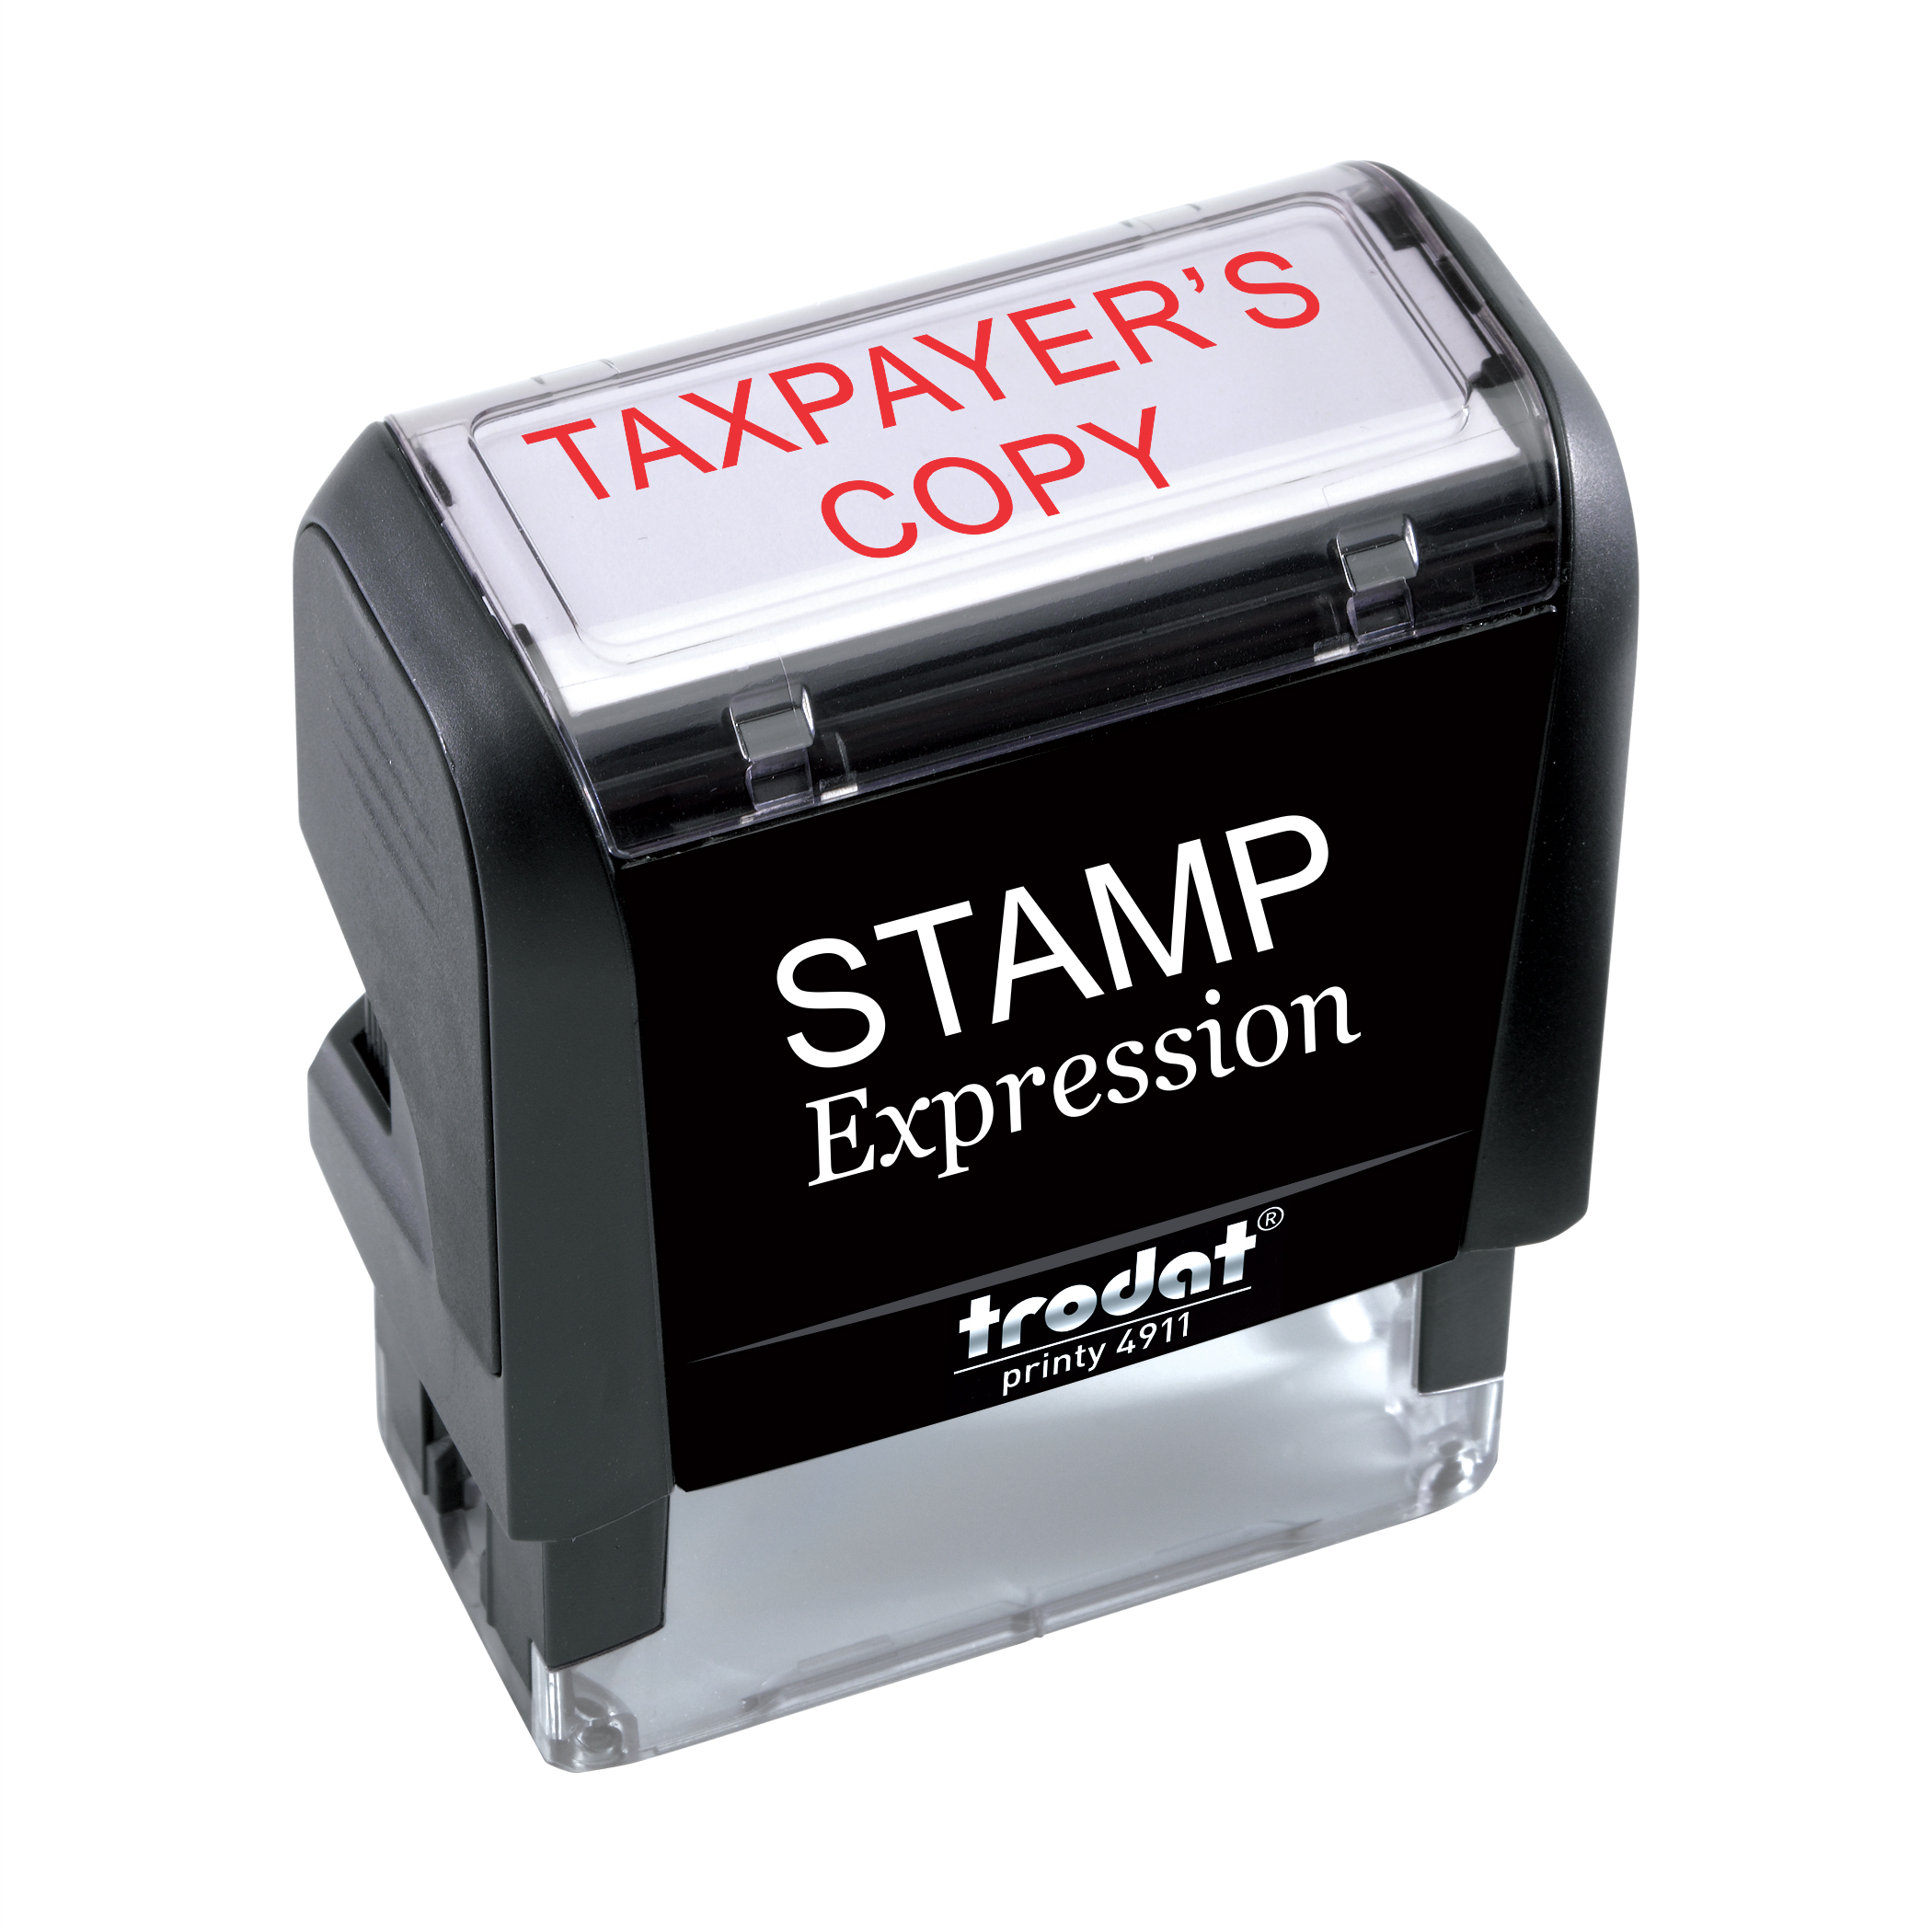 TAXPAYER'S Copy Office Self Inking Rubber Stamp